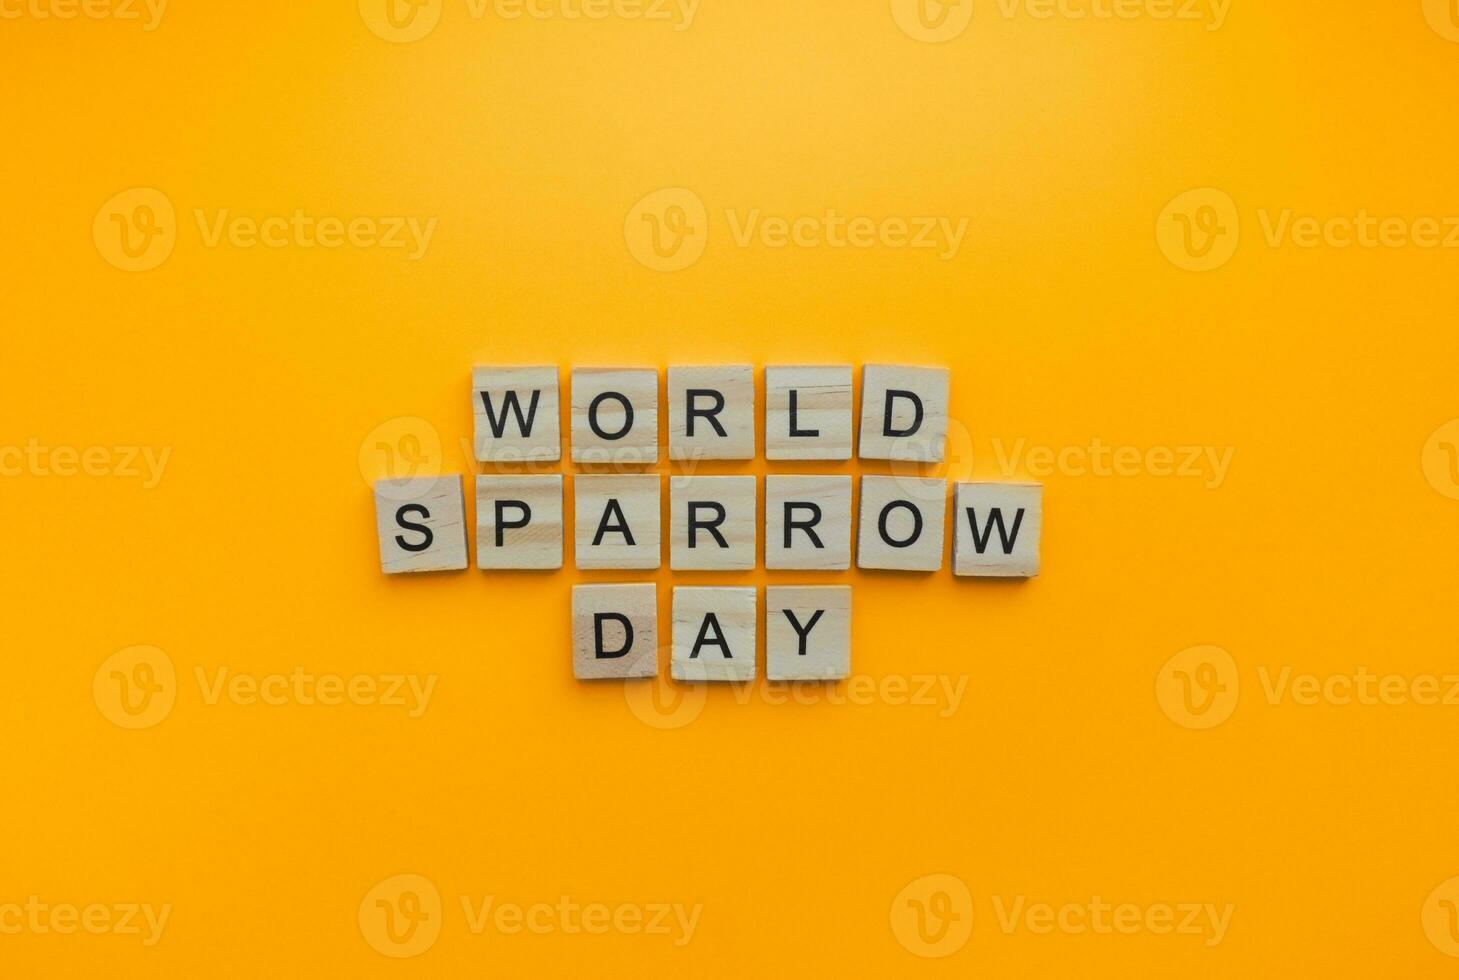 On March 20, World Sparrow Day, a minimalistic banner with an inscription in wooden letters photo